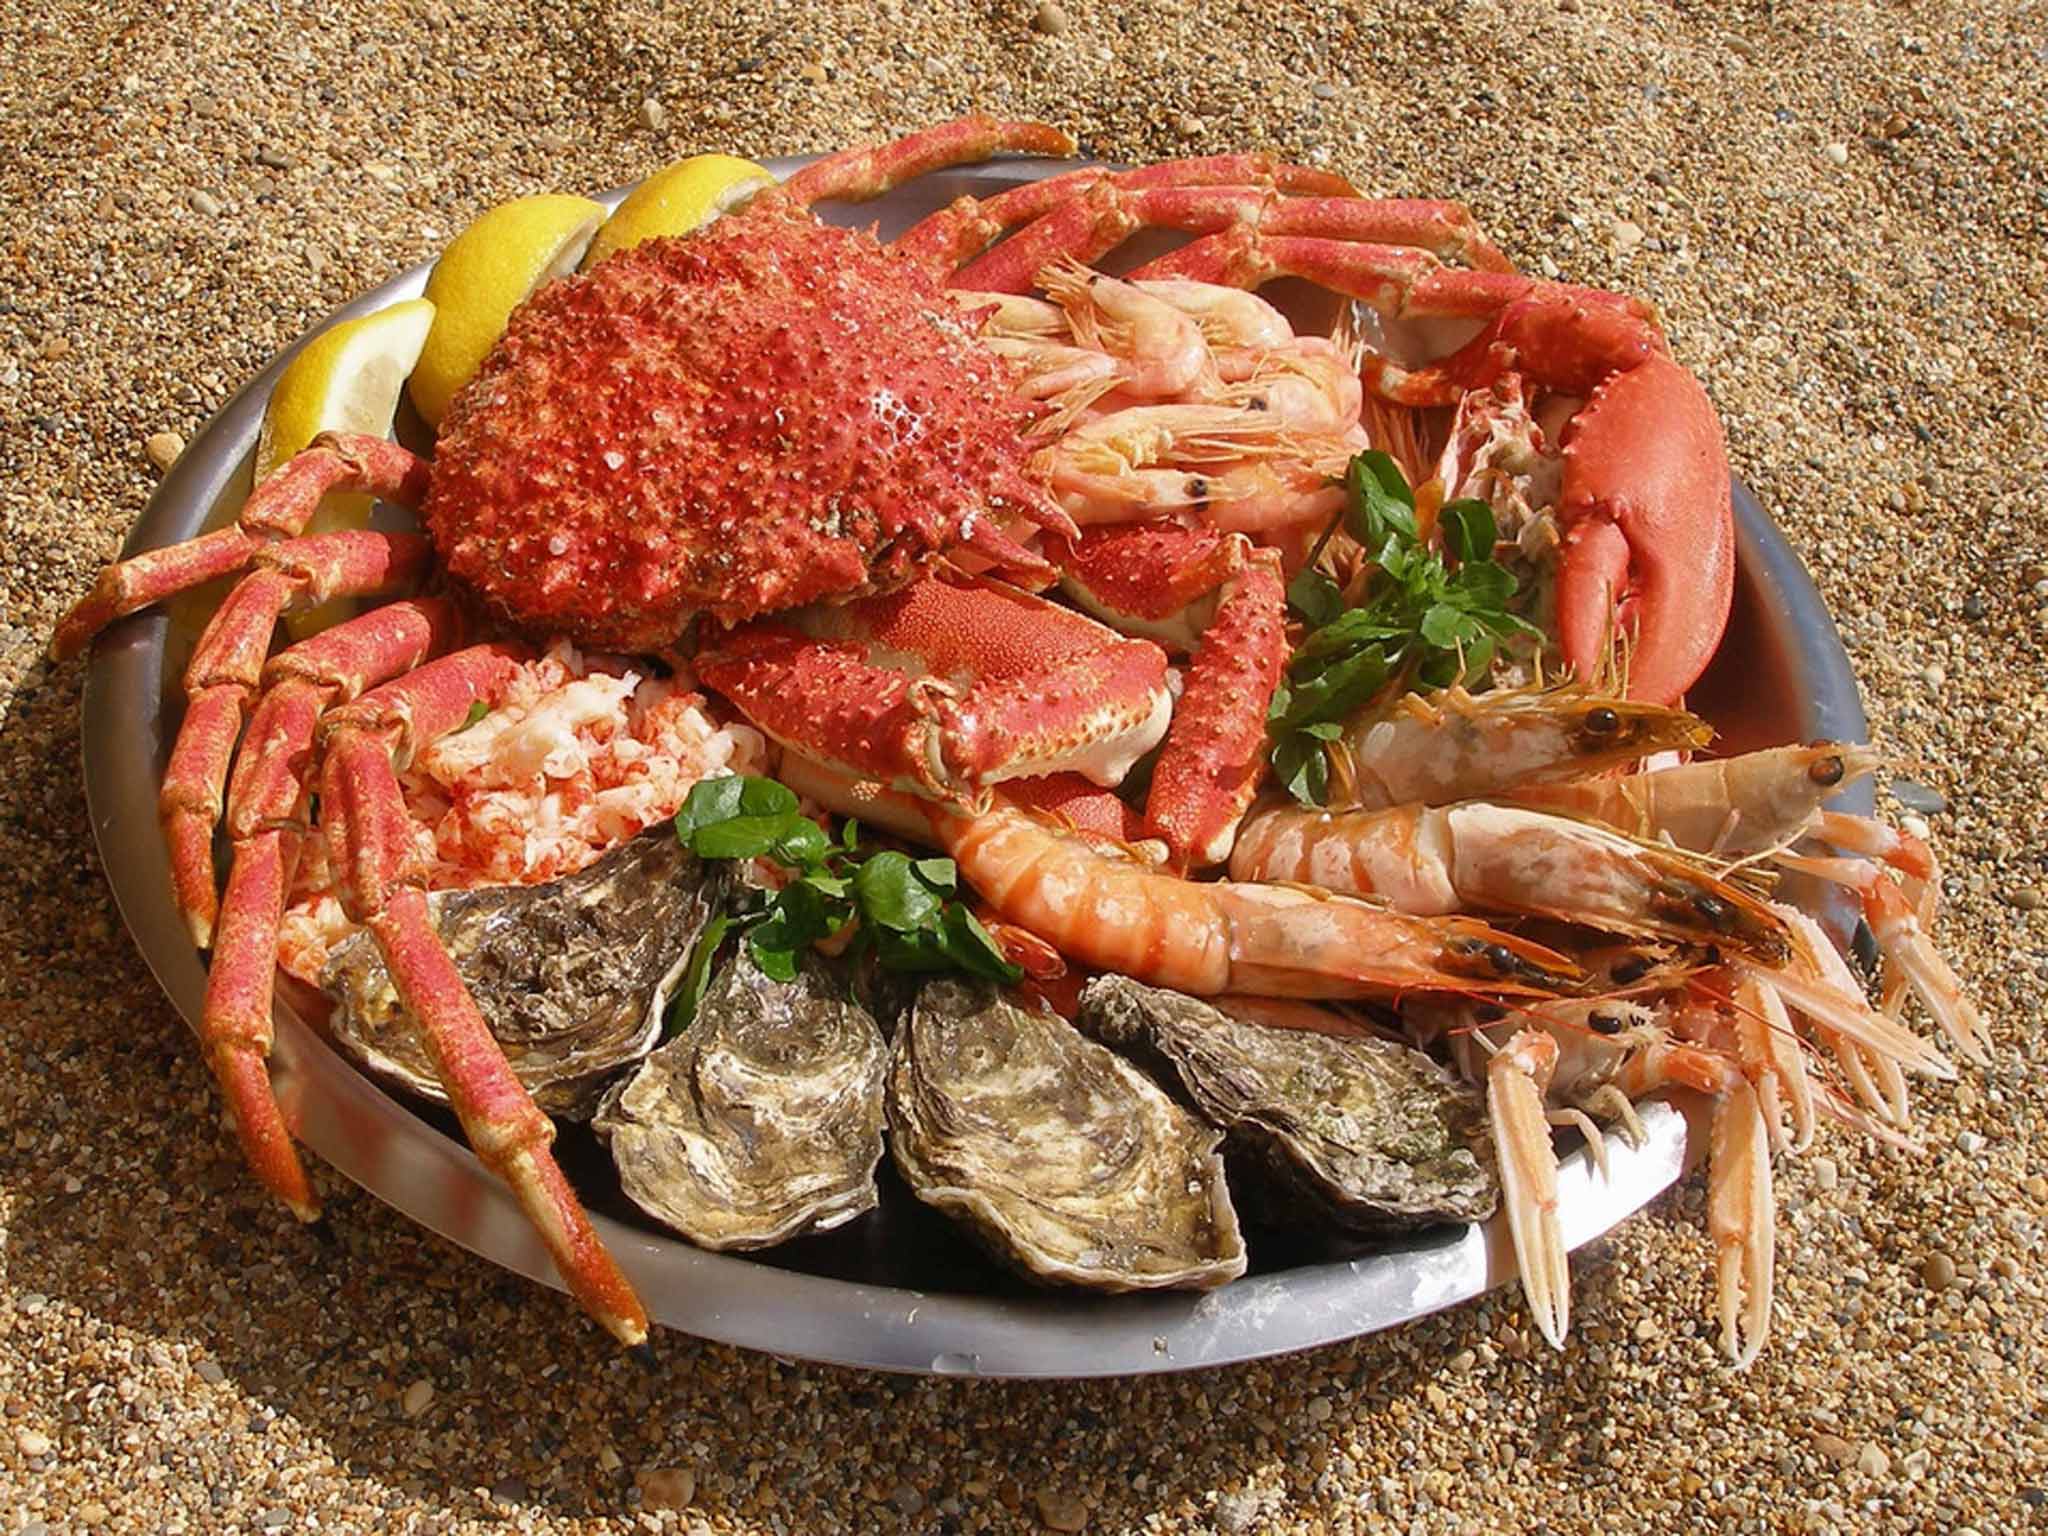 Hive Beach: All the seafood is very locally sourced